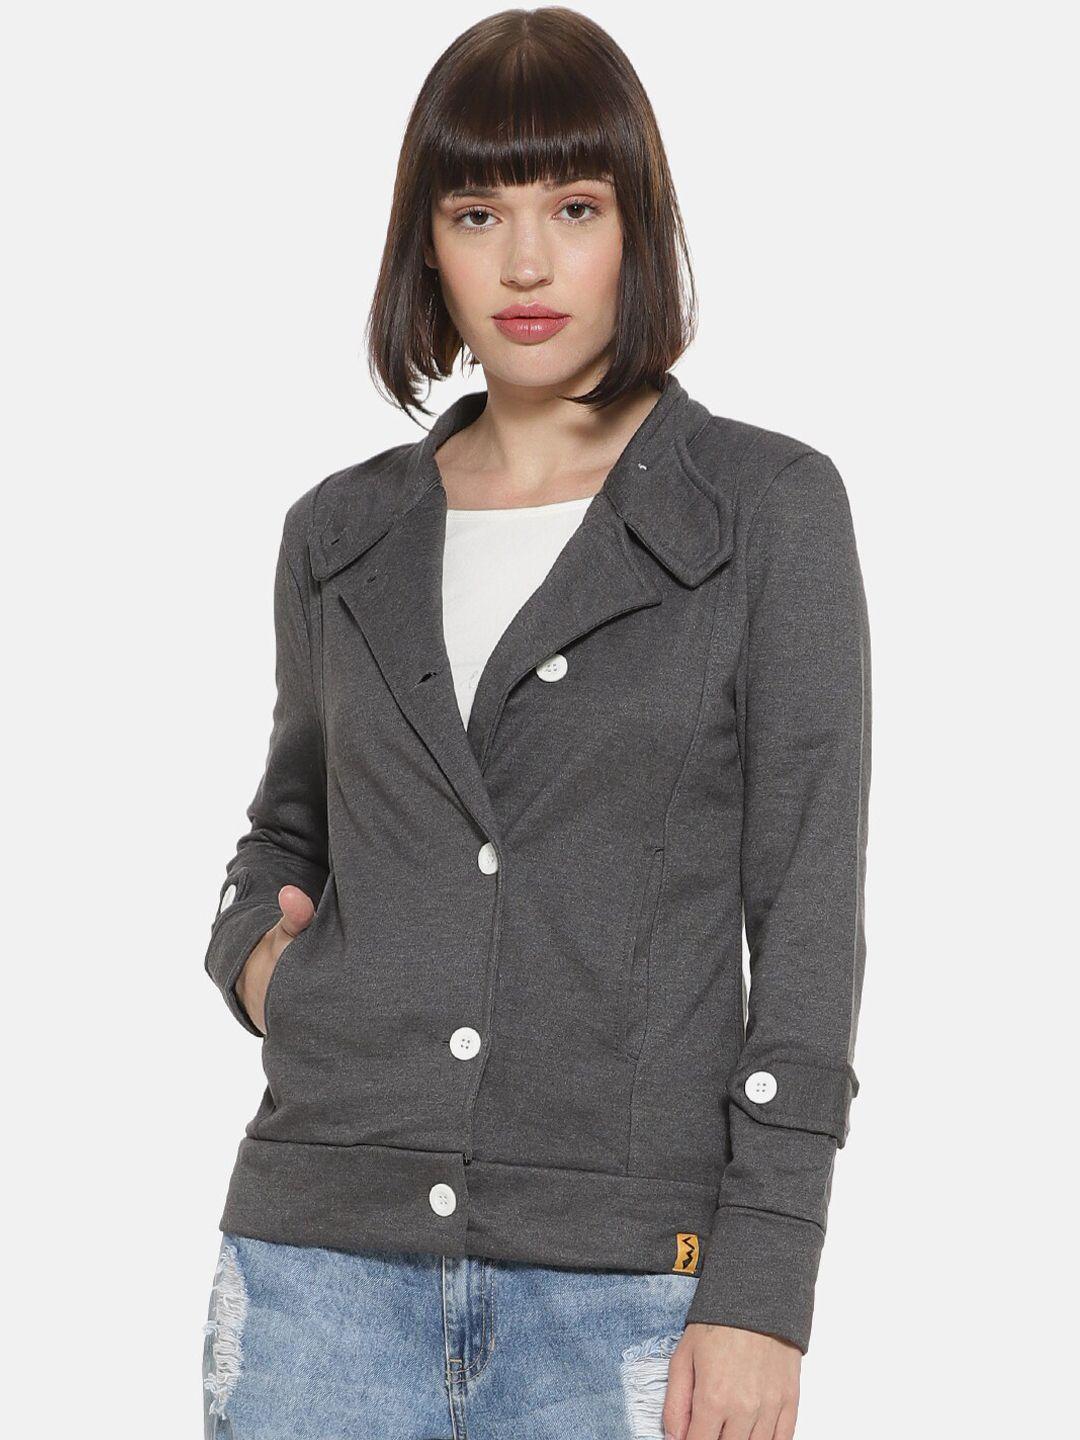 campus sutra women charcoal geometric bomber jacket